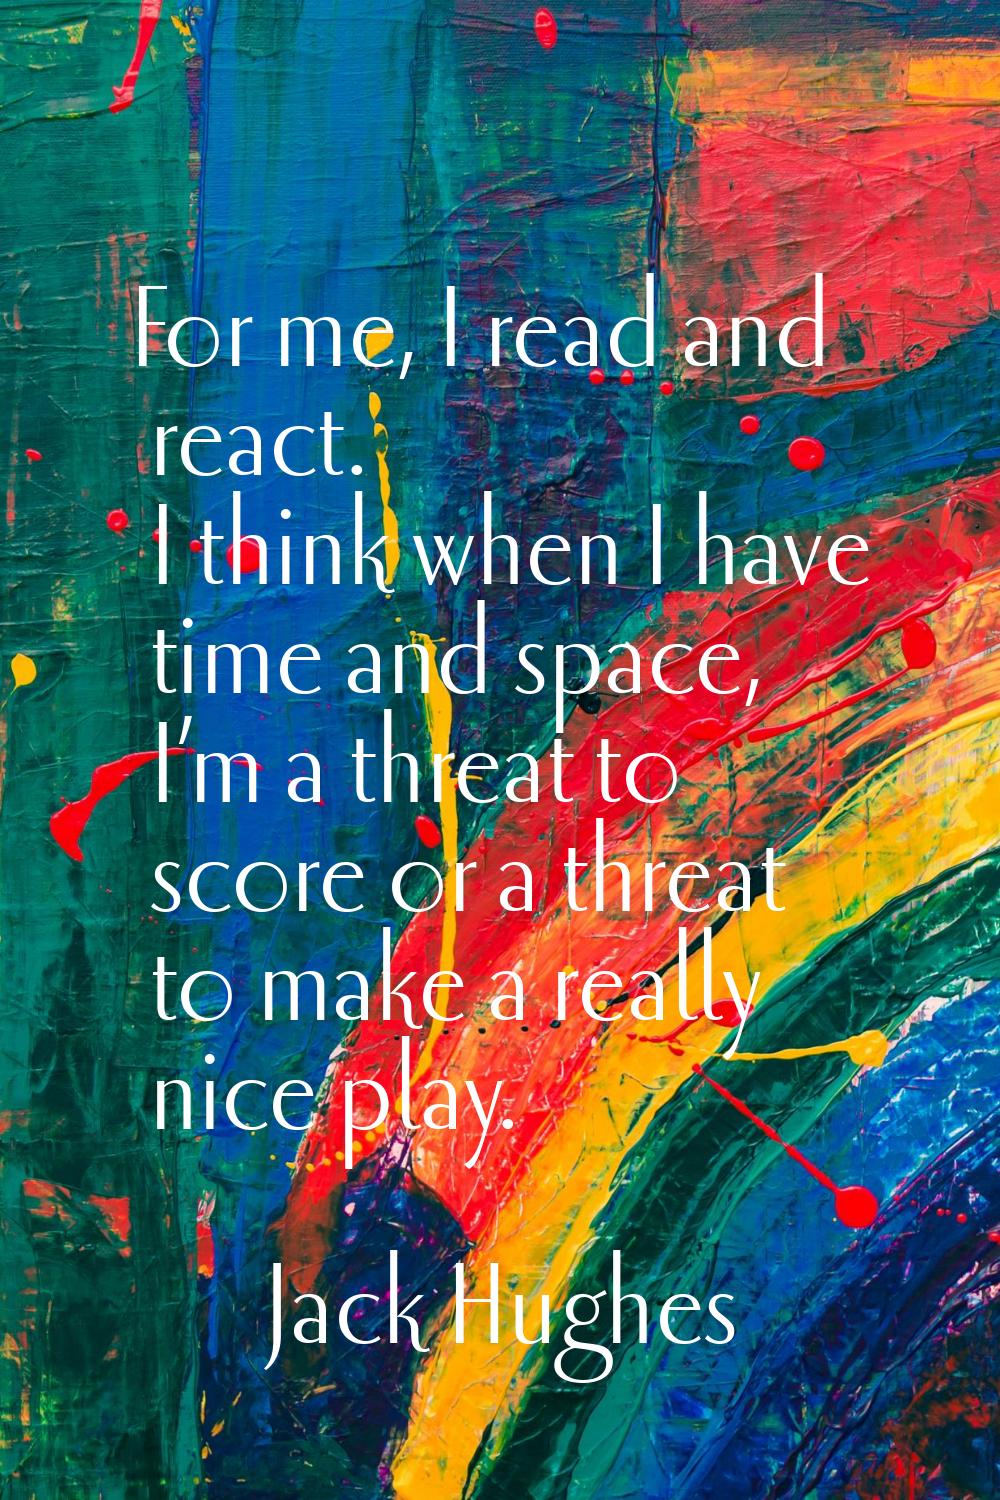 For me, I read and react. I think when I have time and space, I’m a threat to score or a threat to 